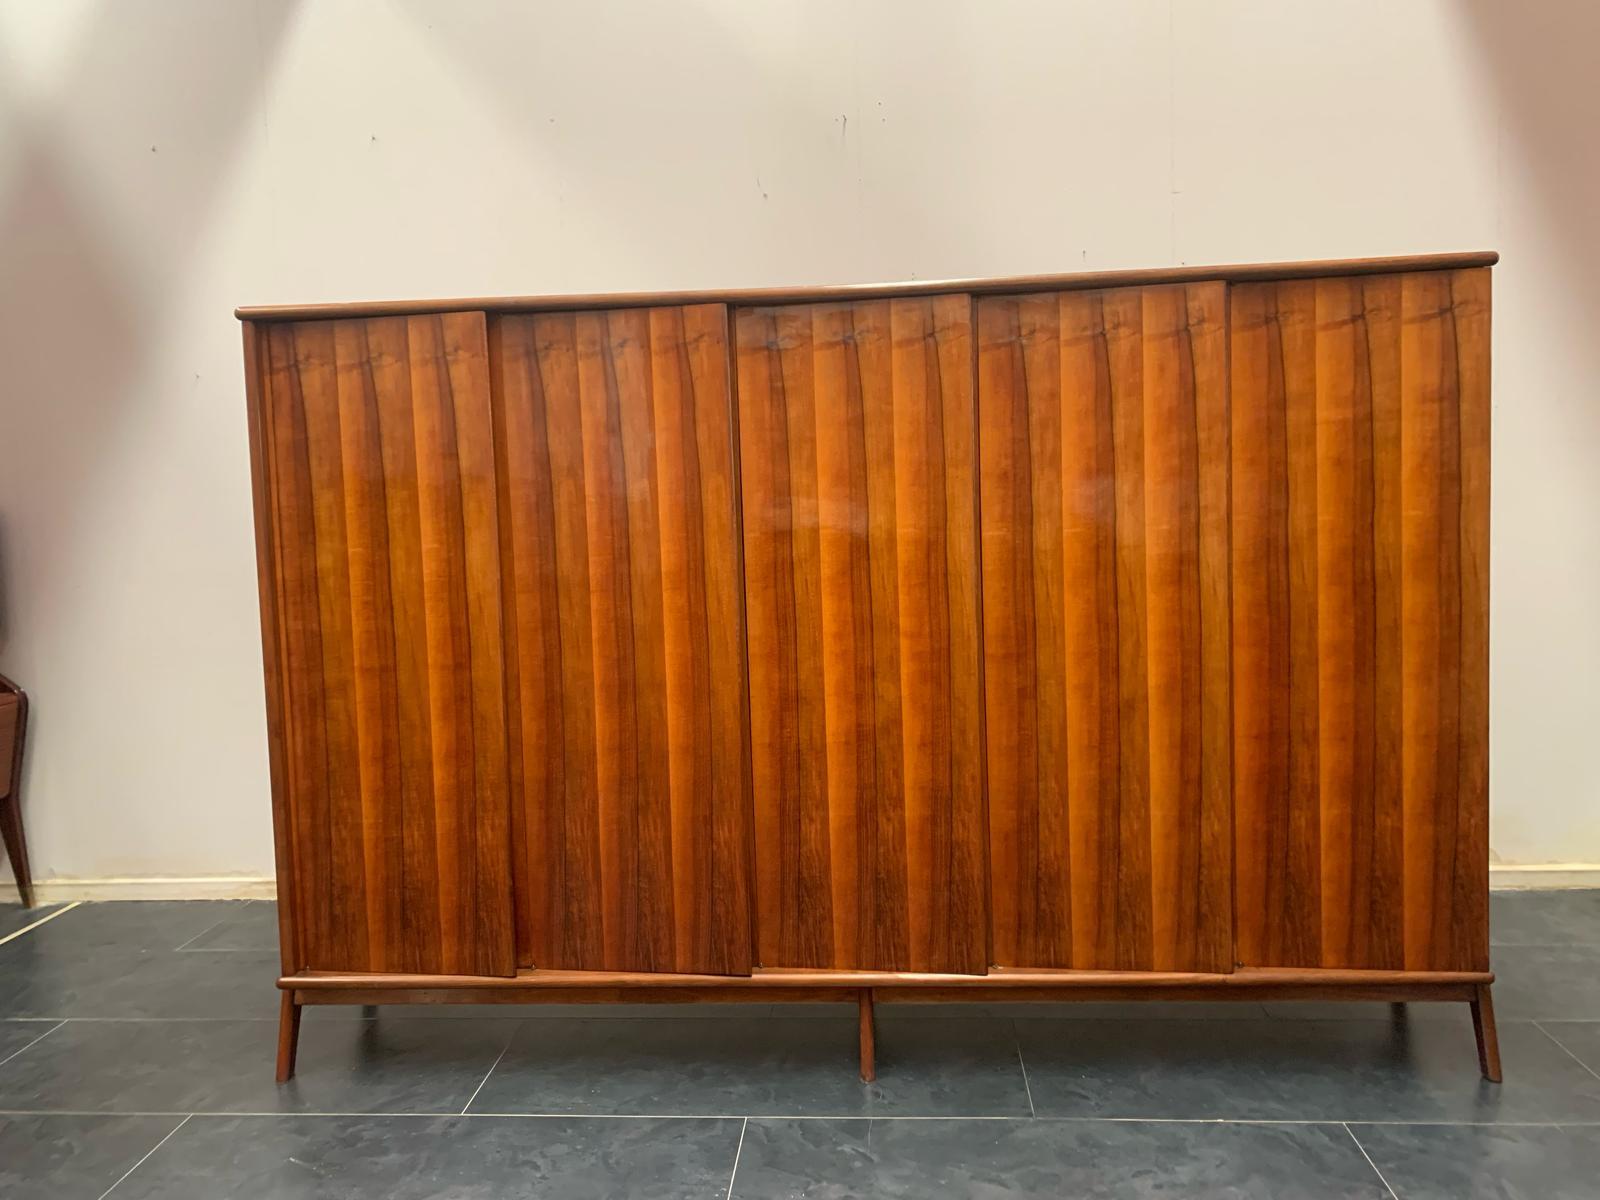 1960s Wardrobe of exceptional design. The excellently built structure with generous thicknesses guarantees functionality and solidity. The central body features a selection of rosewood doors placed diagonally without visible hinges and handles. The